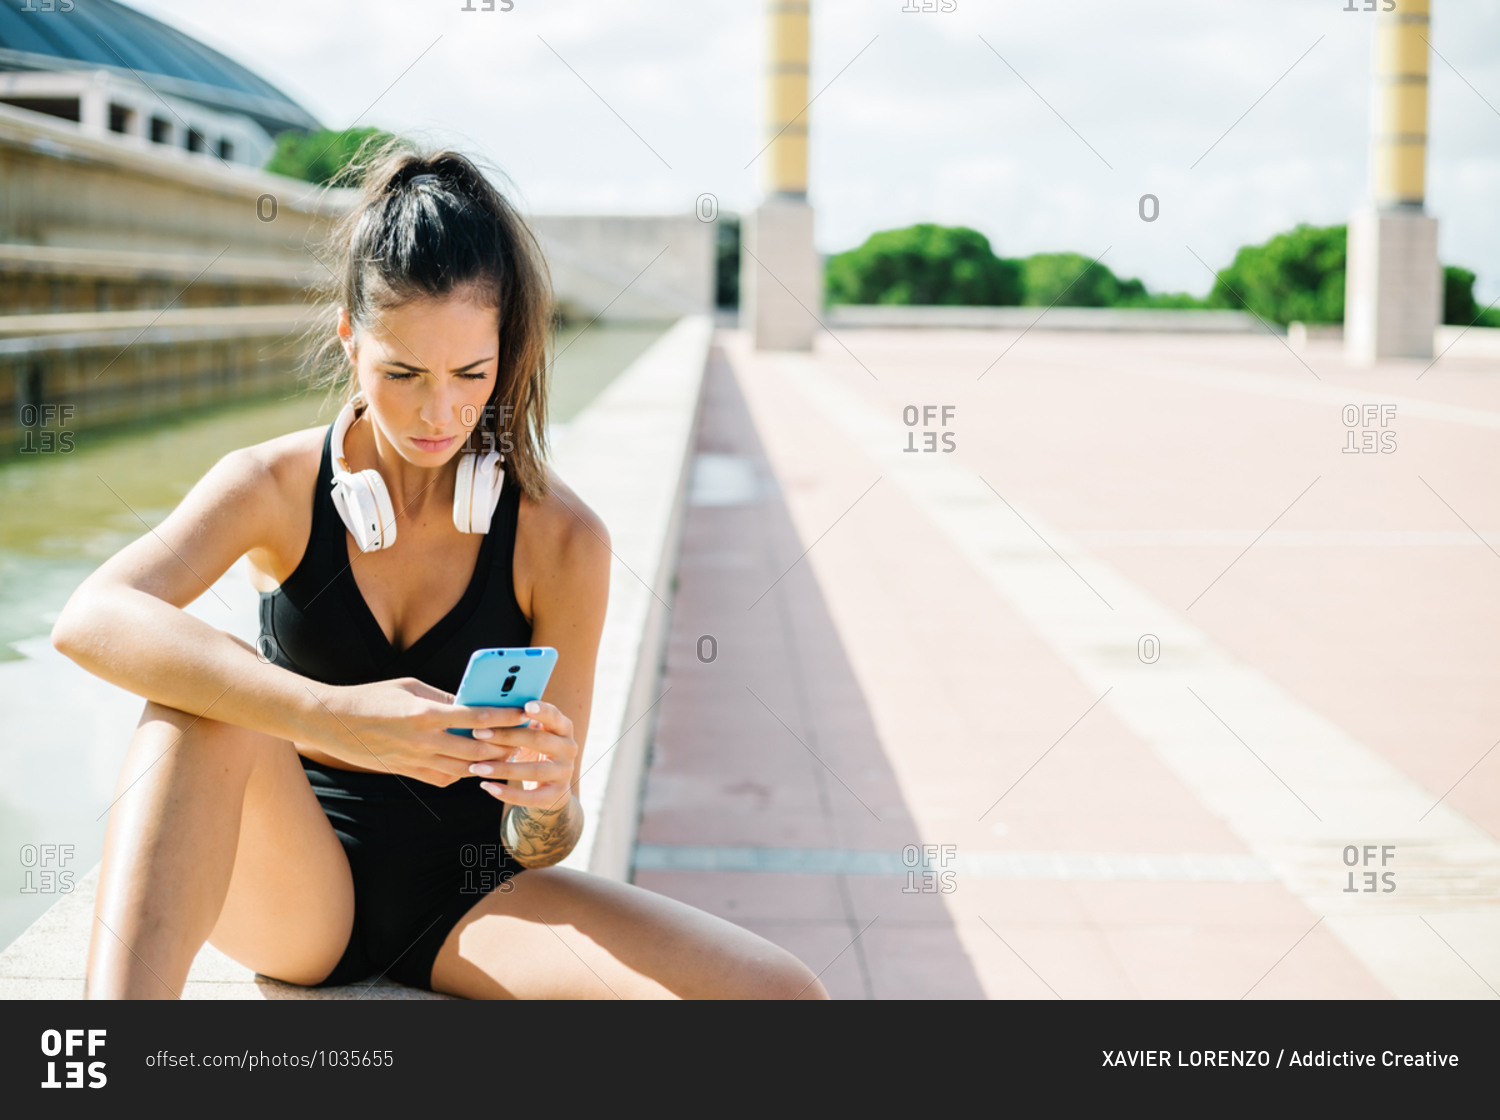 Fit female with tattoo on arm and headphones on neck dressed in black sports bra and shorts browsing mobile phone while sitting on stone border and relaxing after fitness workout on street